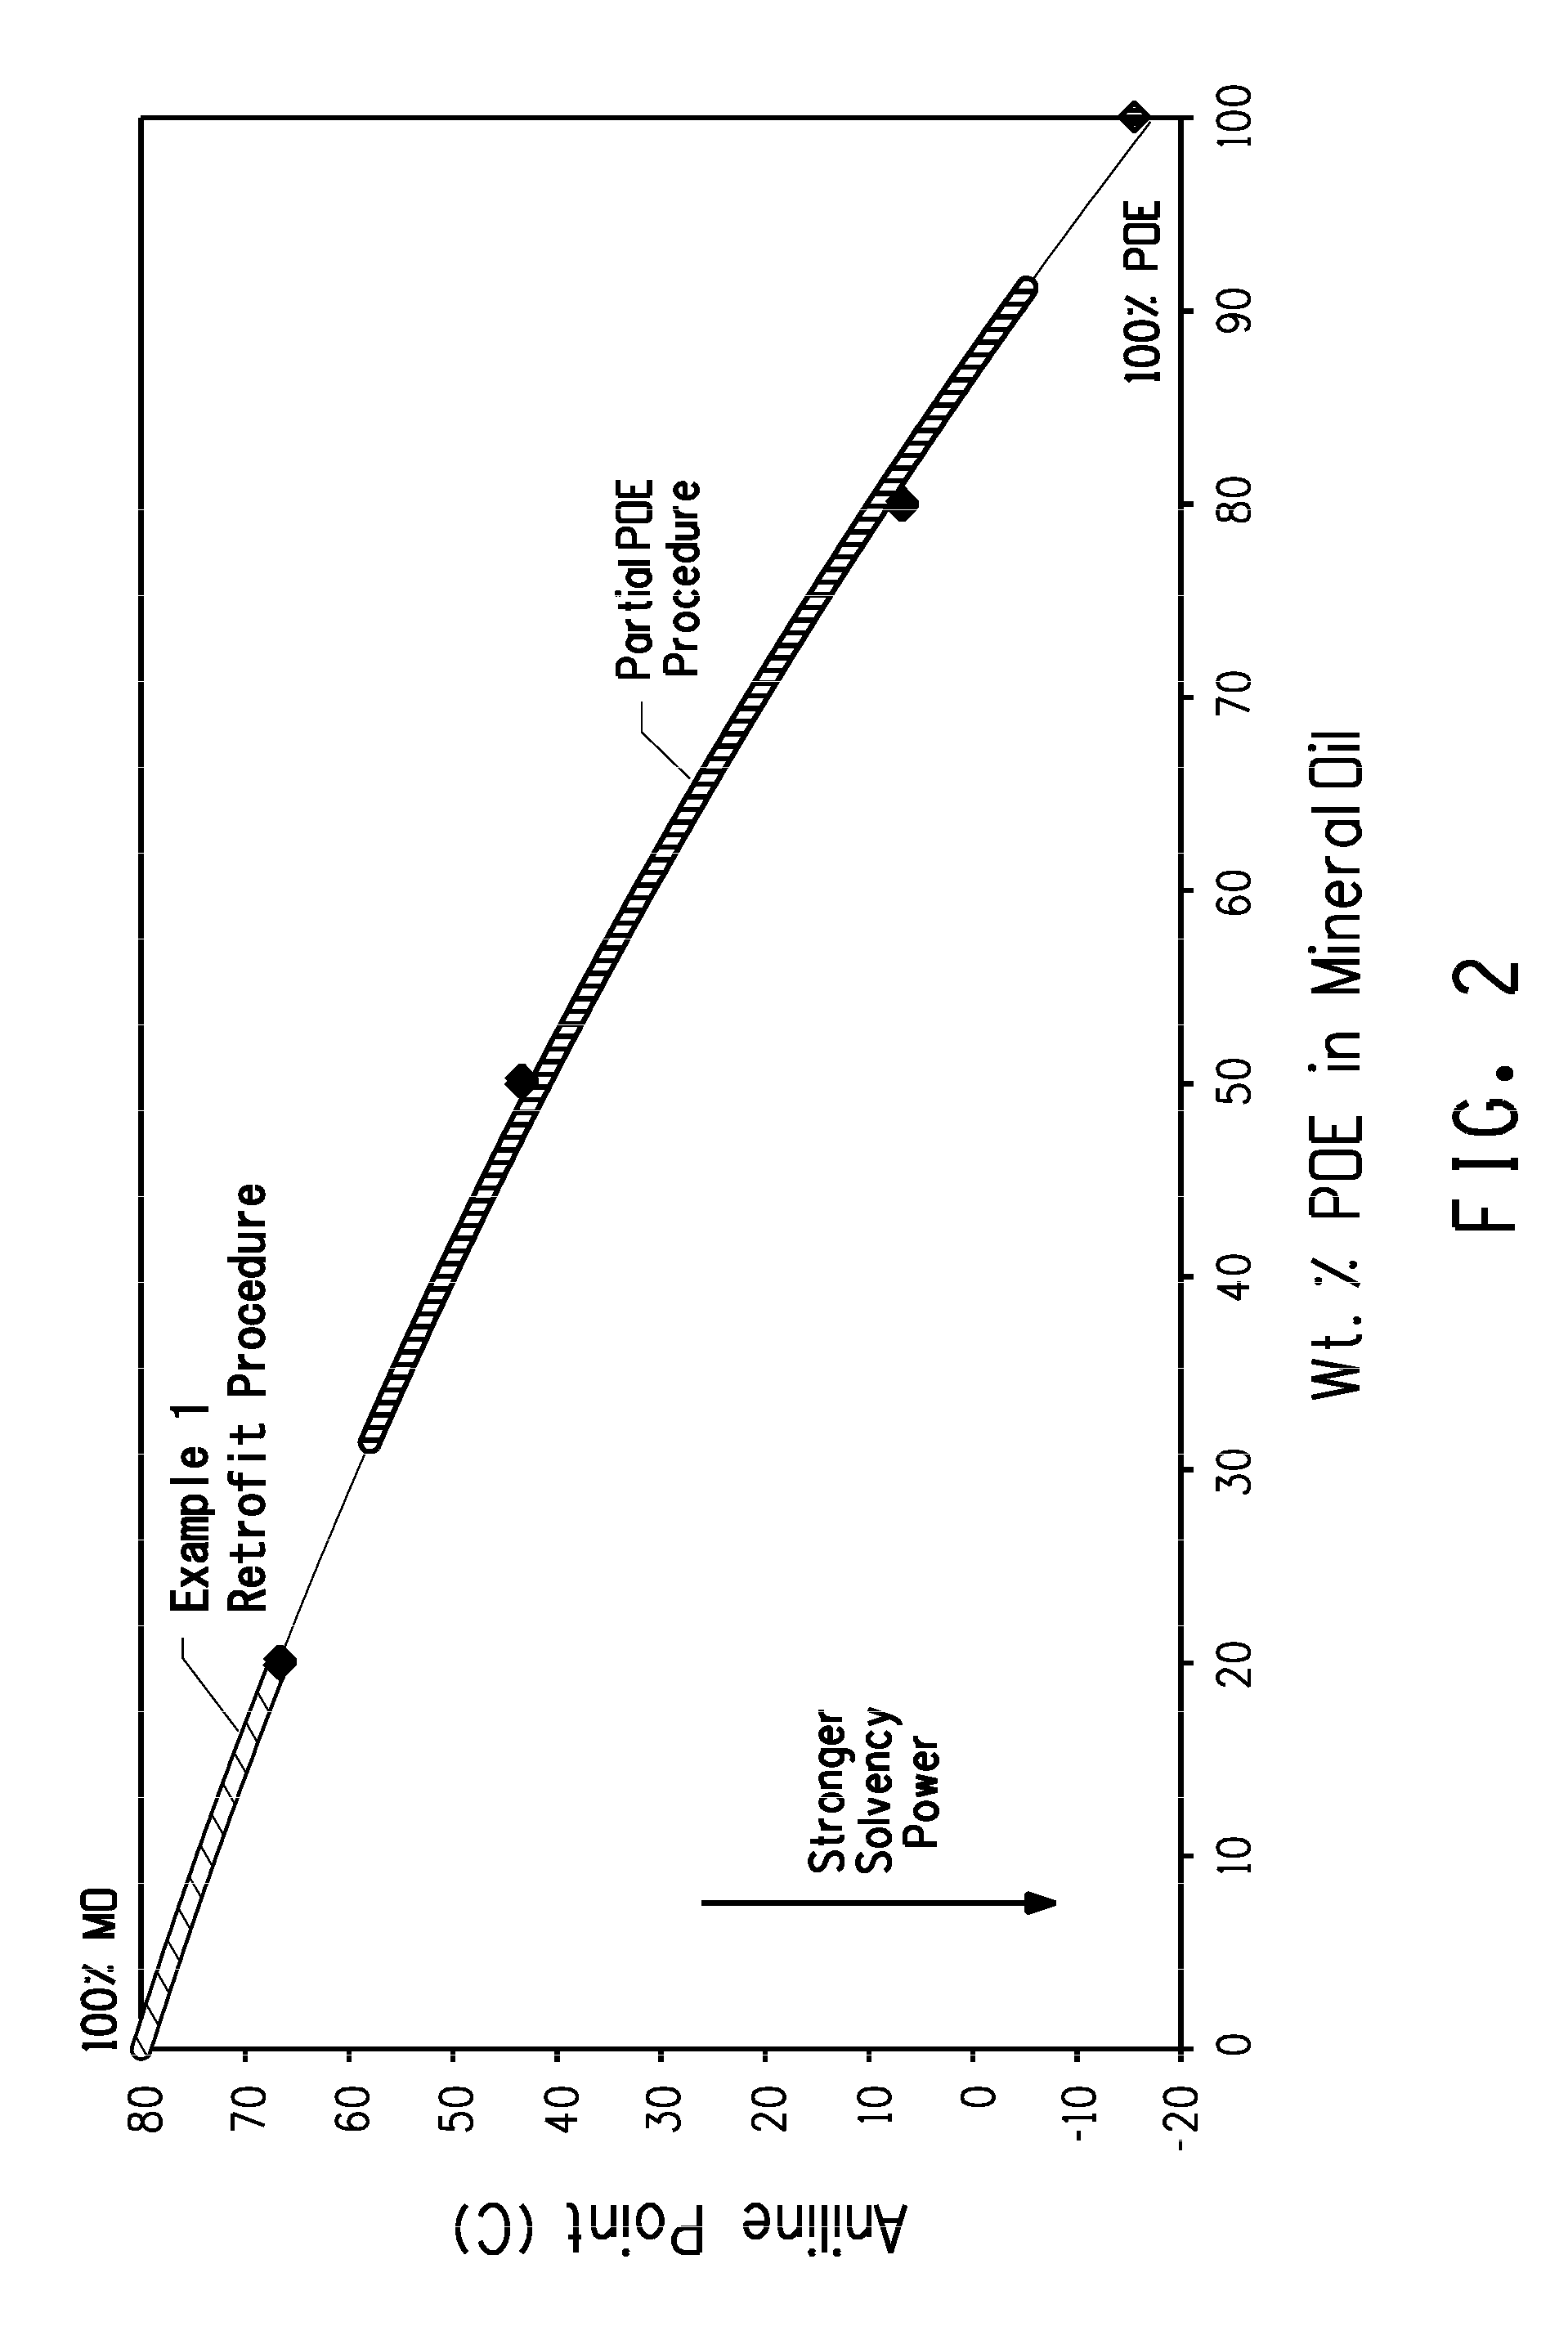 Compositions comprising refrigerant and lubricant and methods for replacing cfc and hcfc refrigerants without flushingfield of the invention